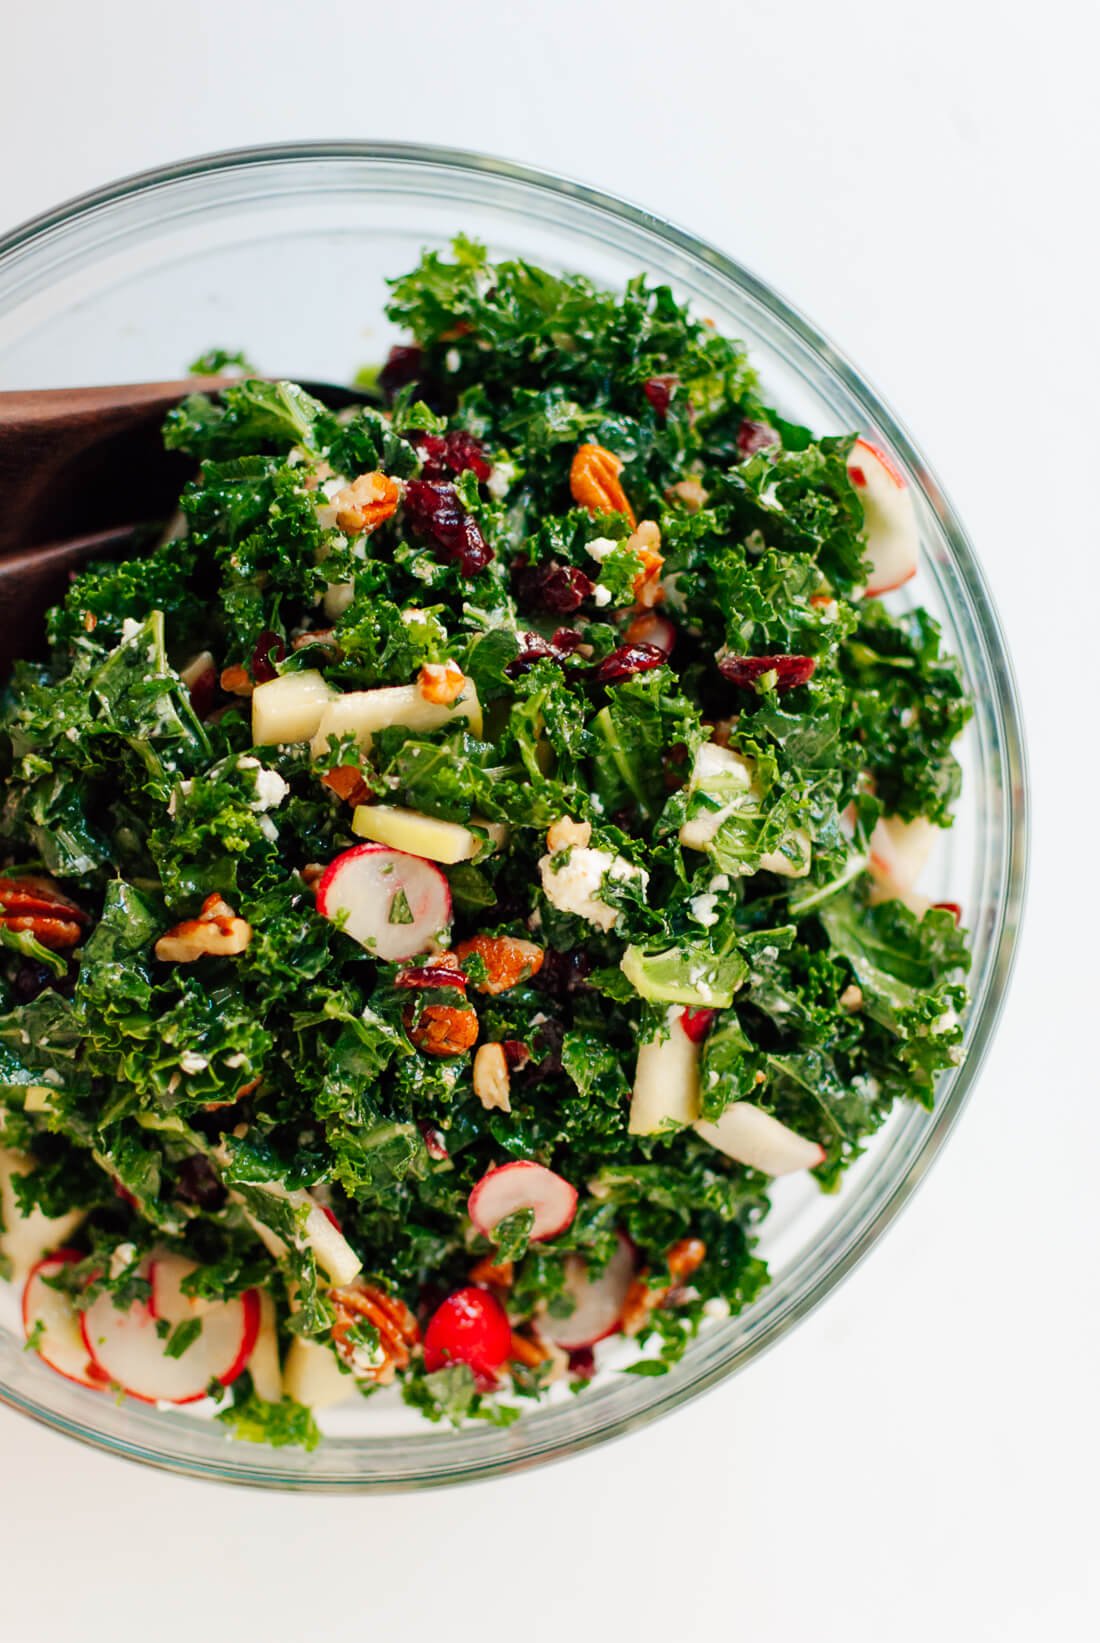 Kale Salad with Apple, Goat Cheese and Pecans